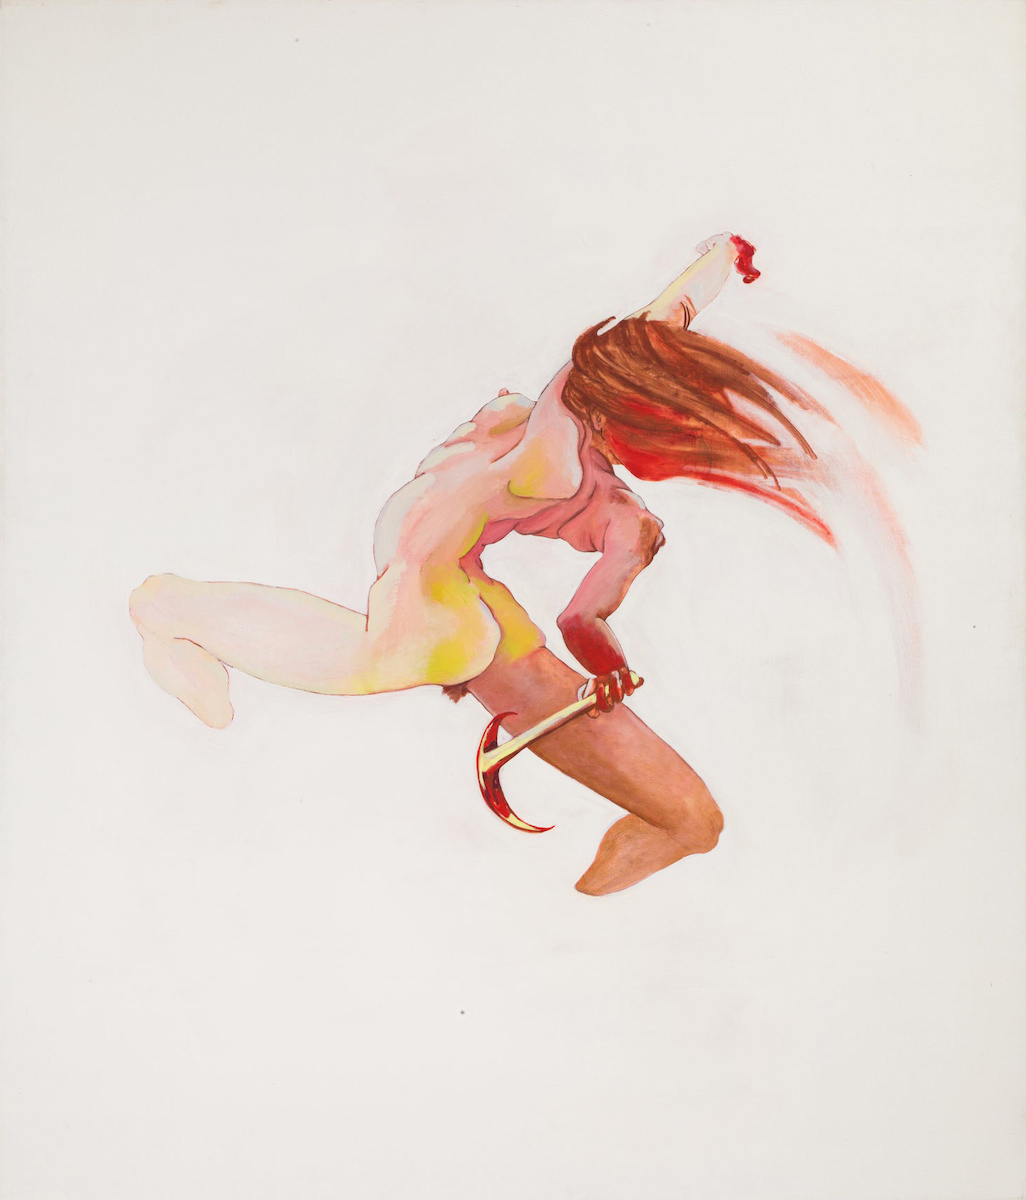 Watercolor artwork of nude figure against an off-white backdrop, jumping away from the viewer, holding a sickle in their hand with their other fist pressed towards the sky.